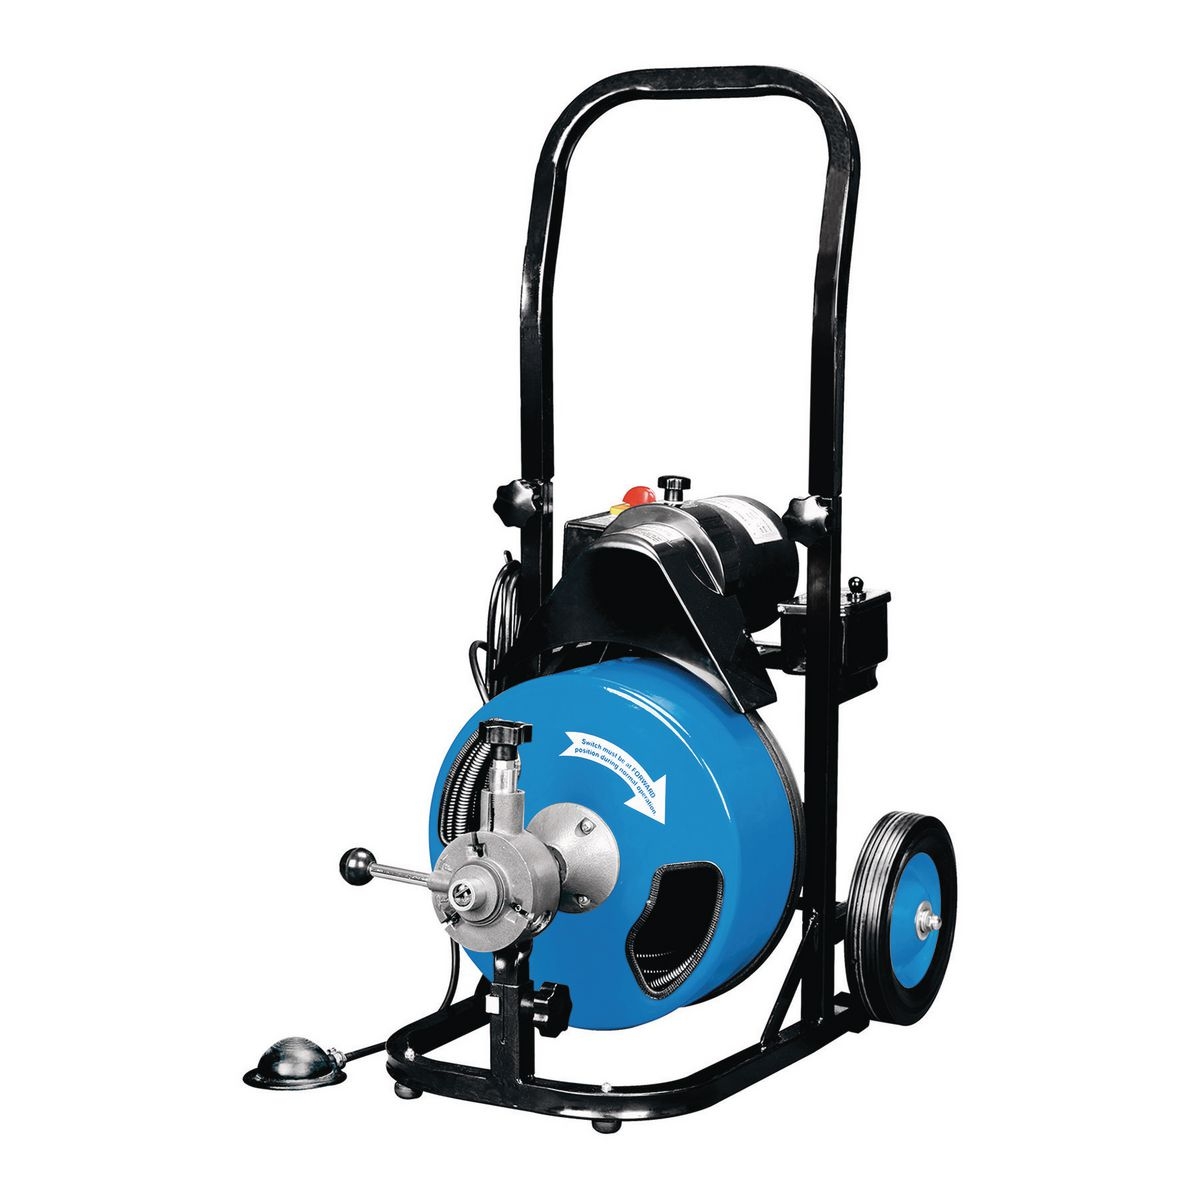 PACIFIC HYDROSTAR 50 Ft. Commercial Power-Feed Drain Cleaner with GFCI - Item 68284 / 61857